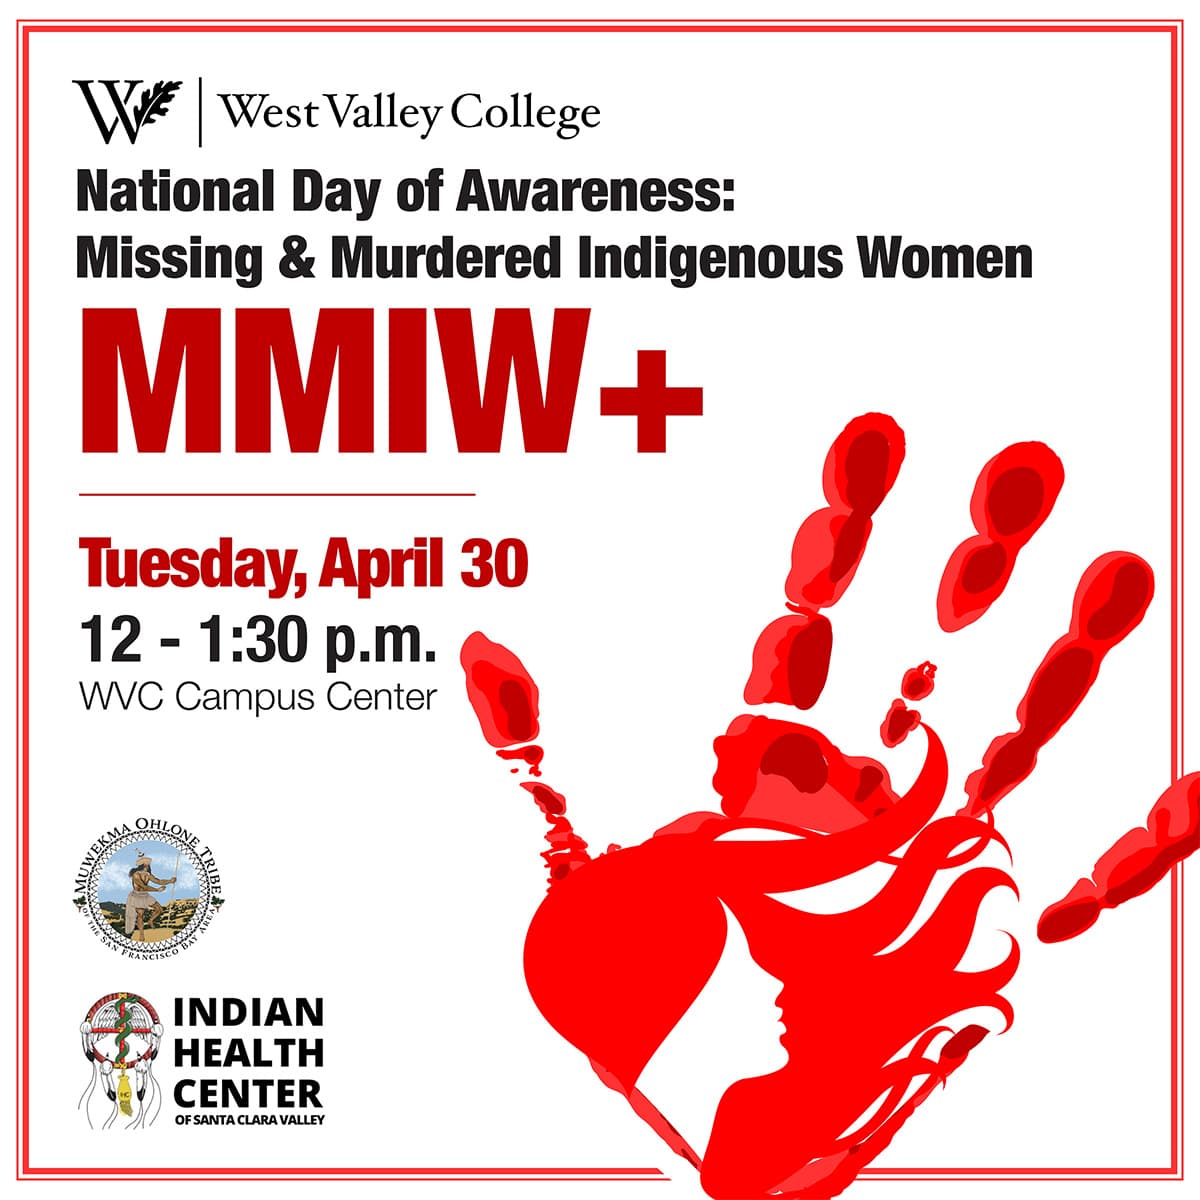 National Day of Awareness - Missing and Murdered Indigenous Women